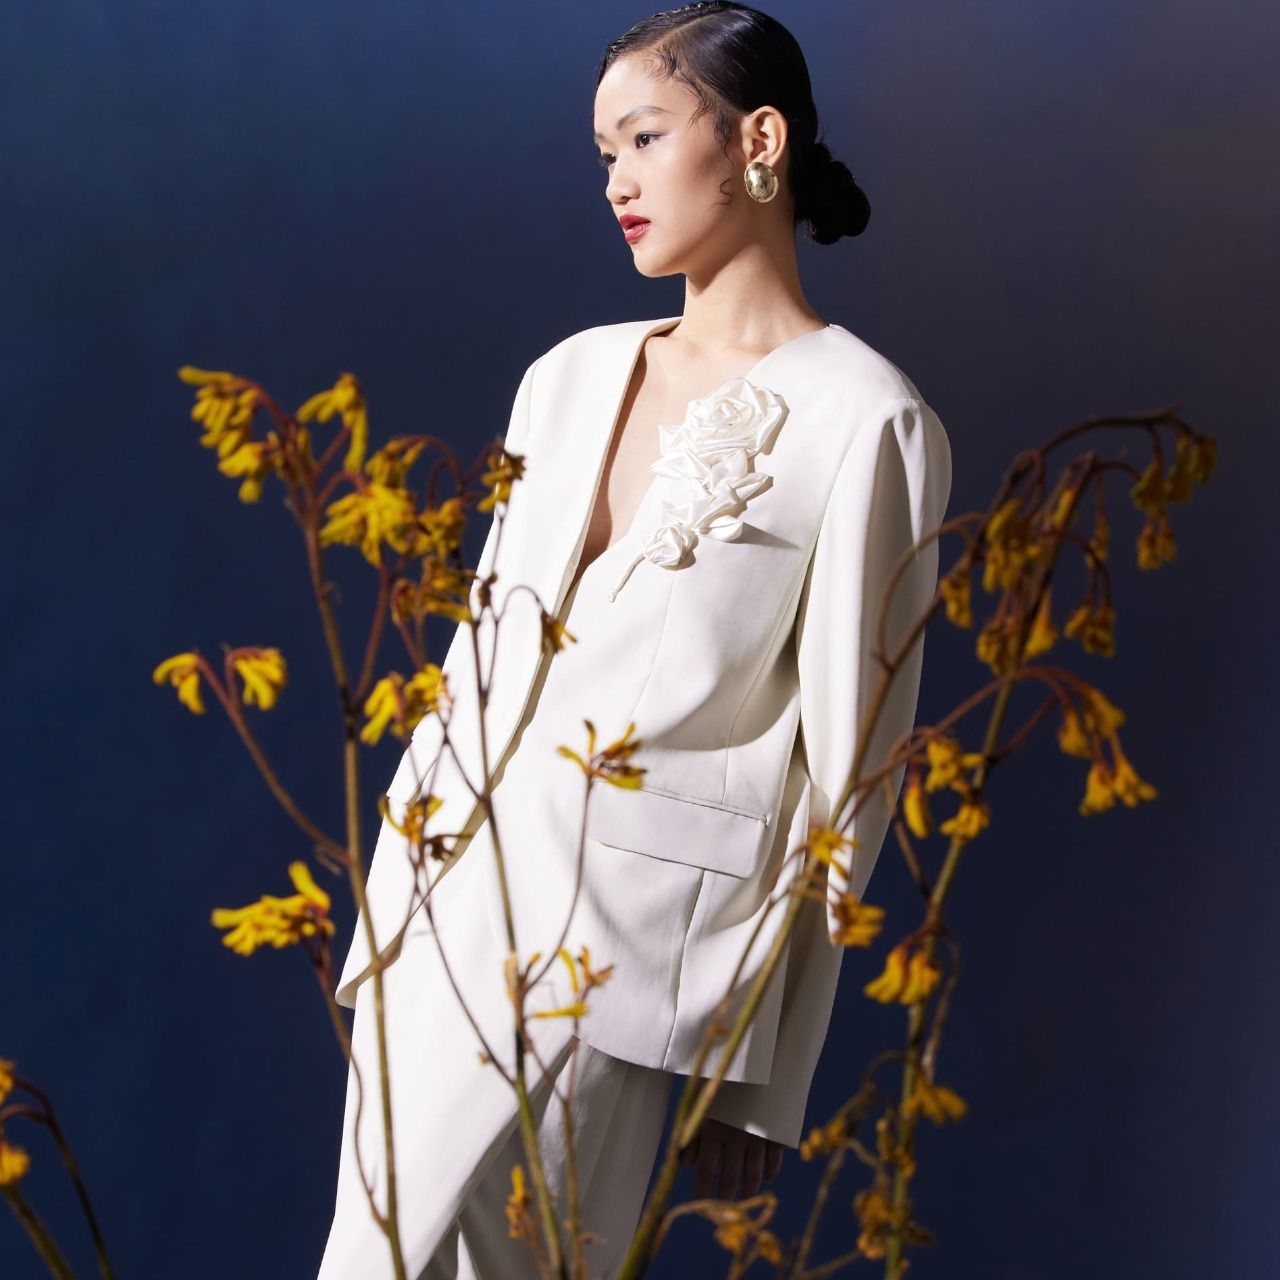 Gift everlasting sculptural blooms from Shanghai Tang's SS 2023 collection